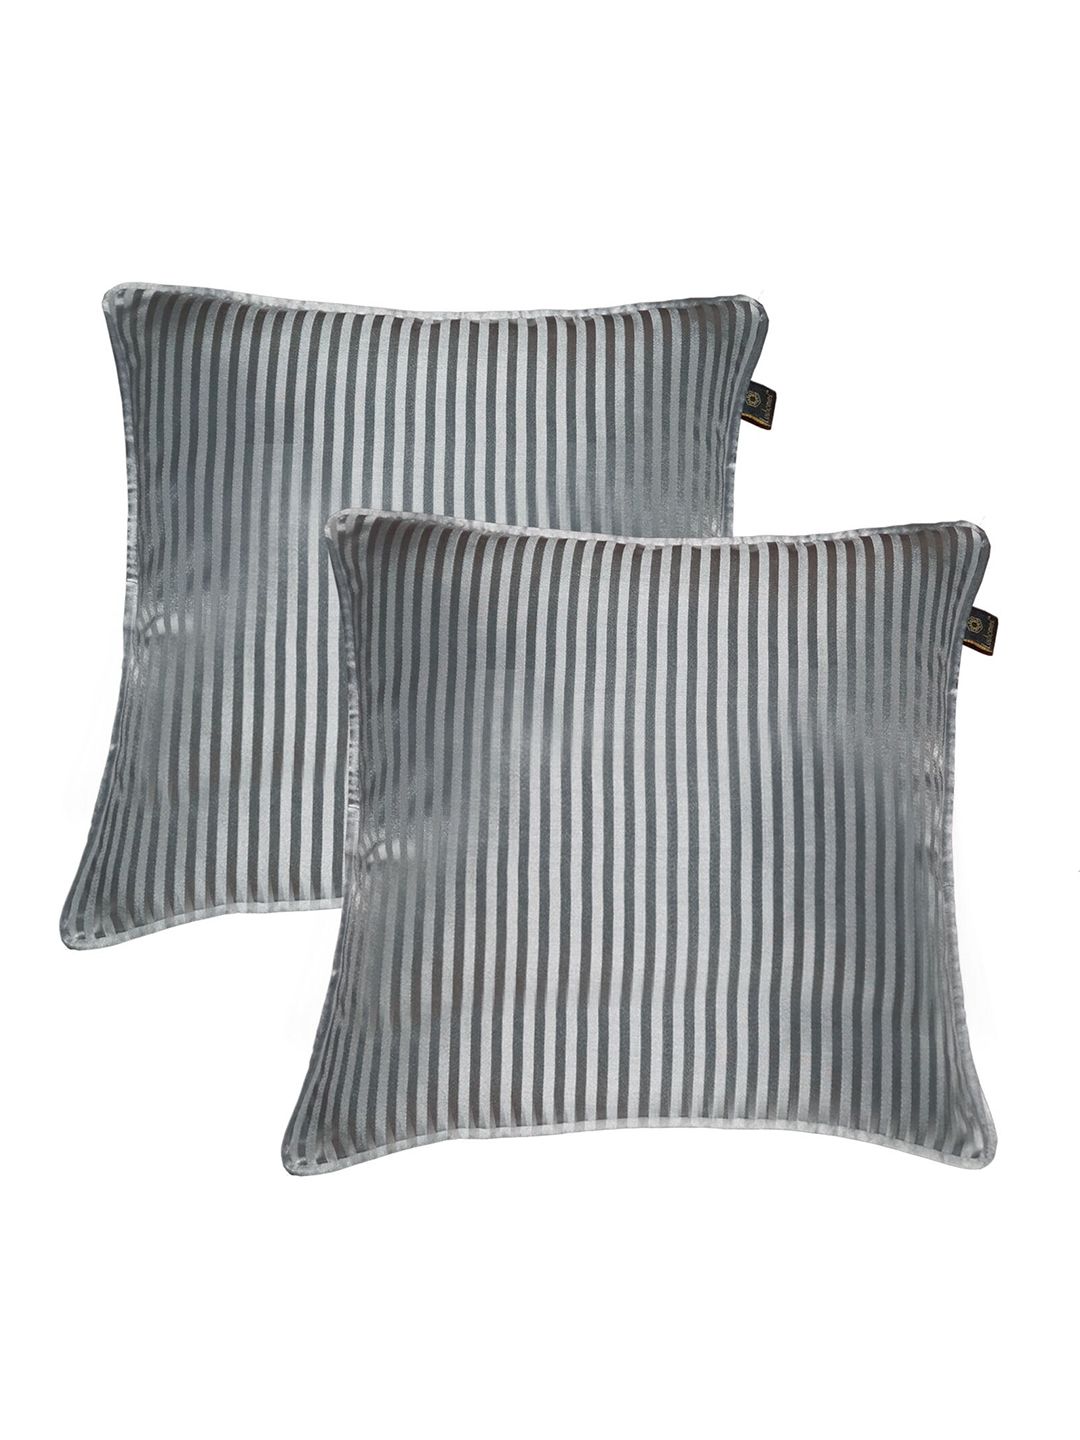 Lushomes Grey Set of 2 Striped Square Cushion Covers Price in India